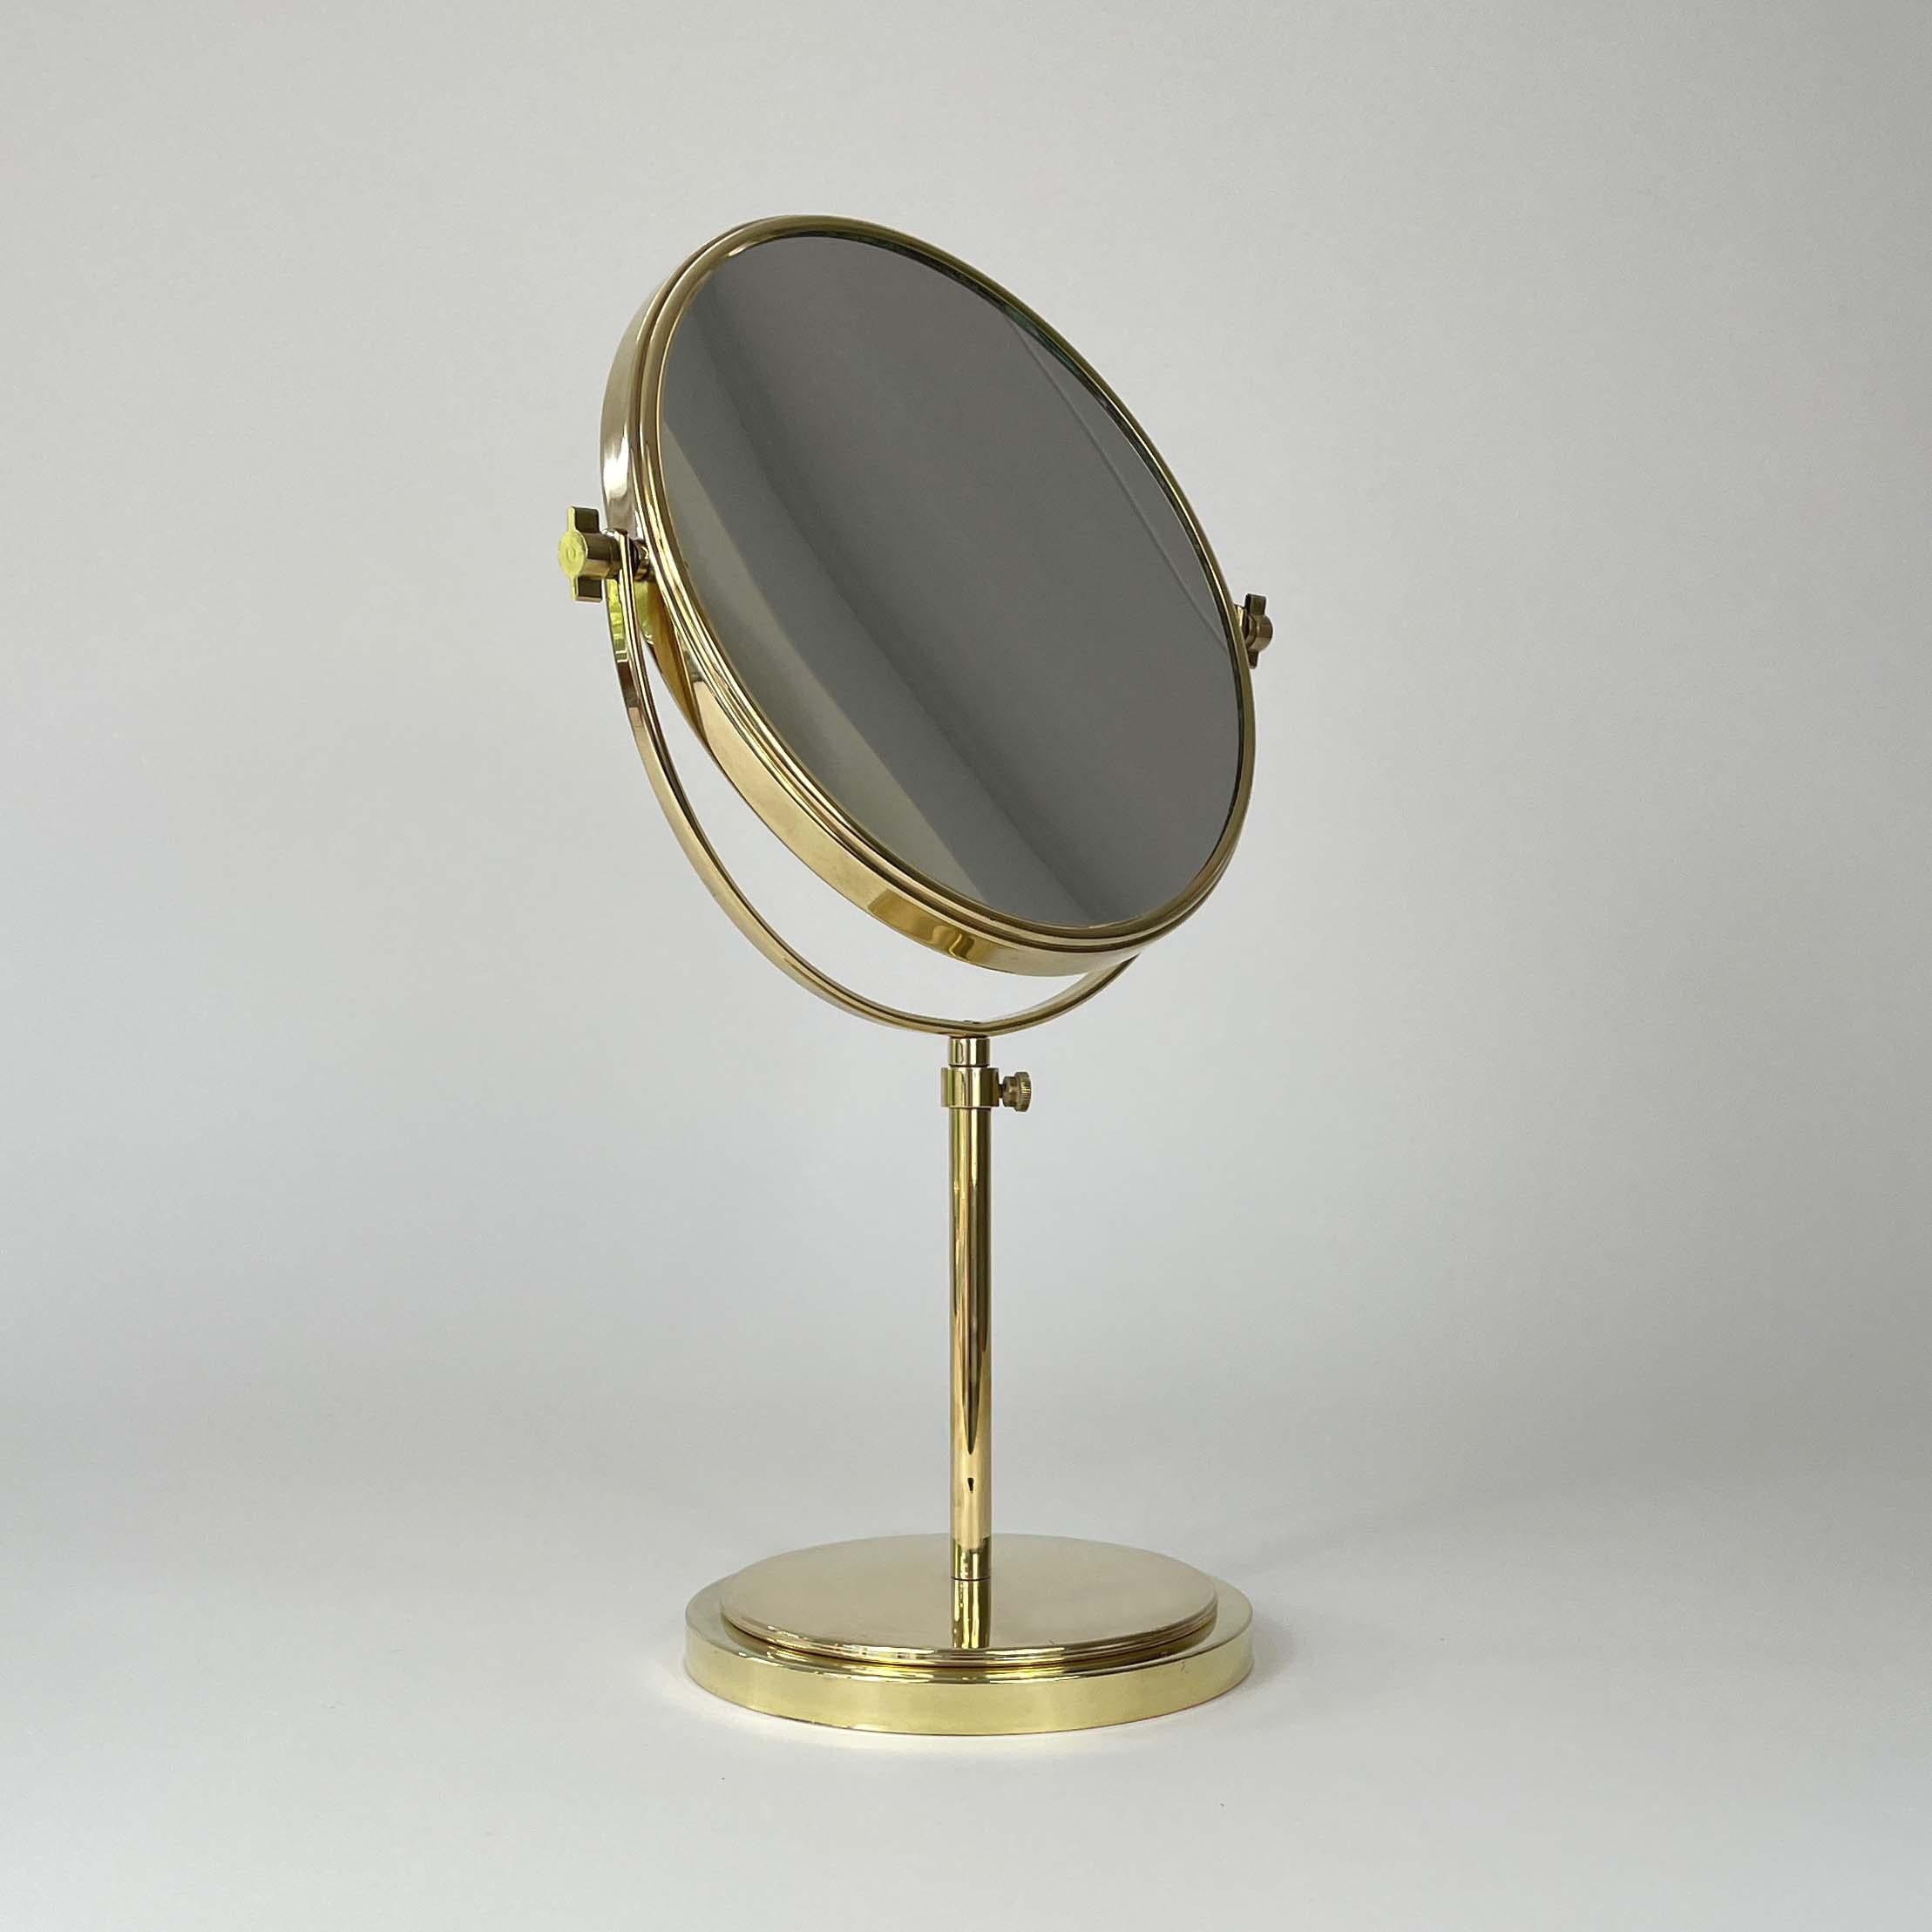 This height adjustable vanity or shaving mirror was designed and manufactured in Sweden in the 1940s to 1950s. It features a double sided brass framed mirror with brass base. 

This beautiful piece is fully adjustable and the mirror is magnified on